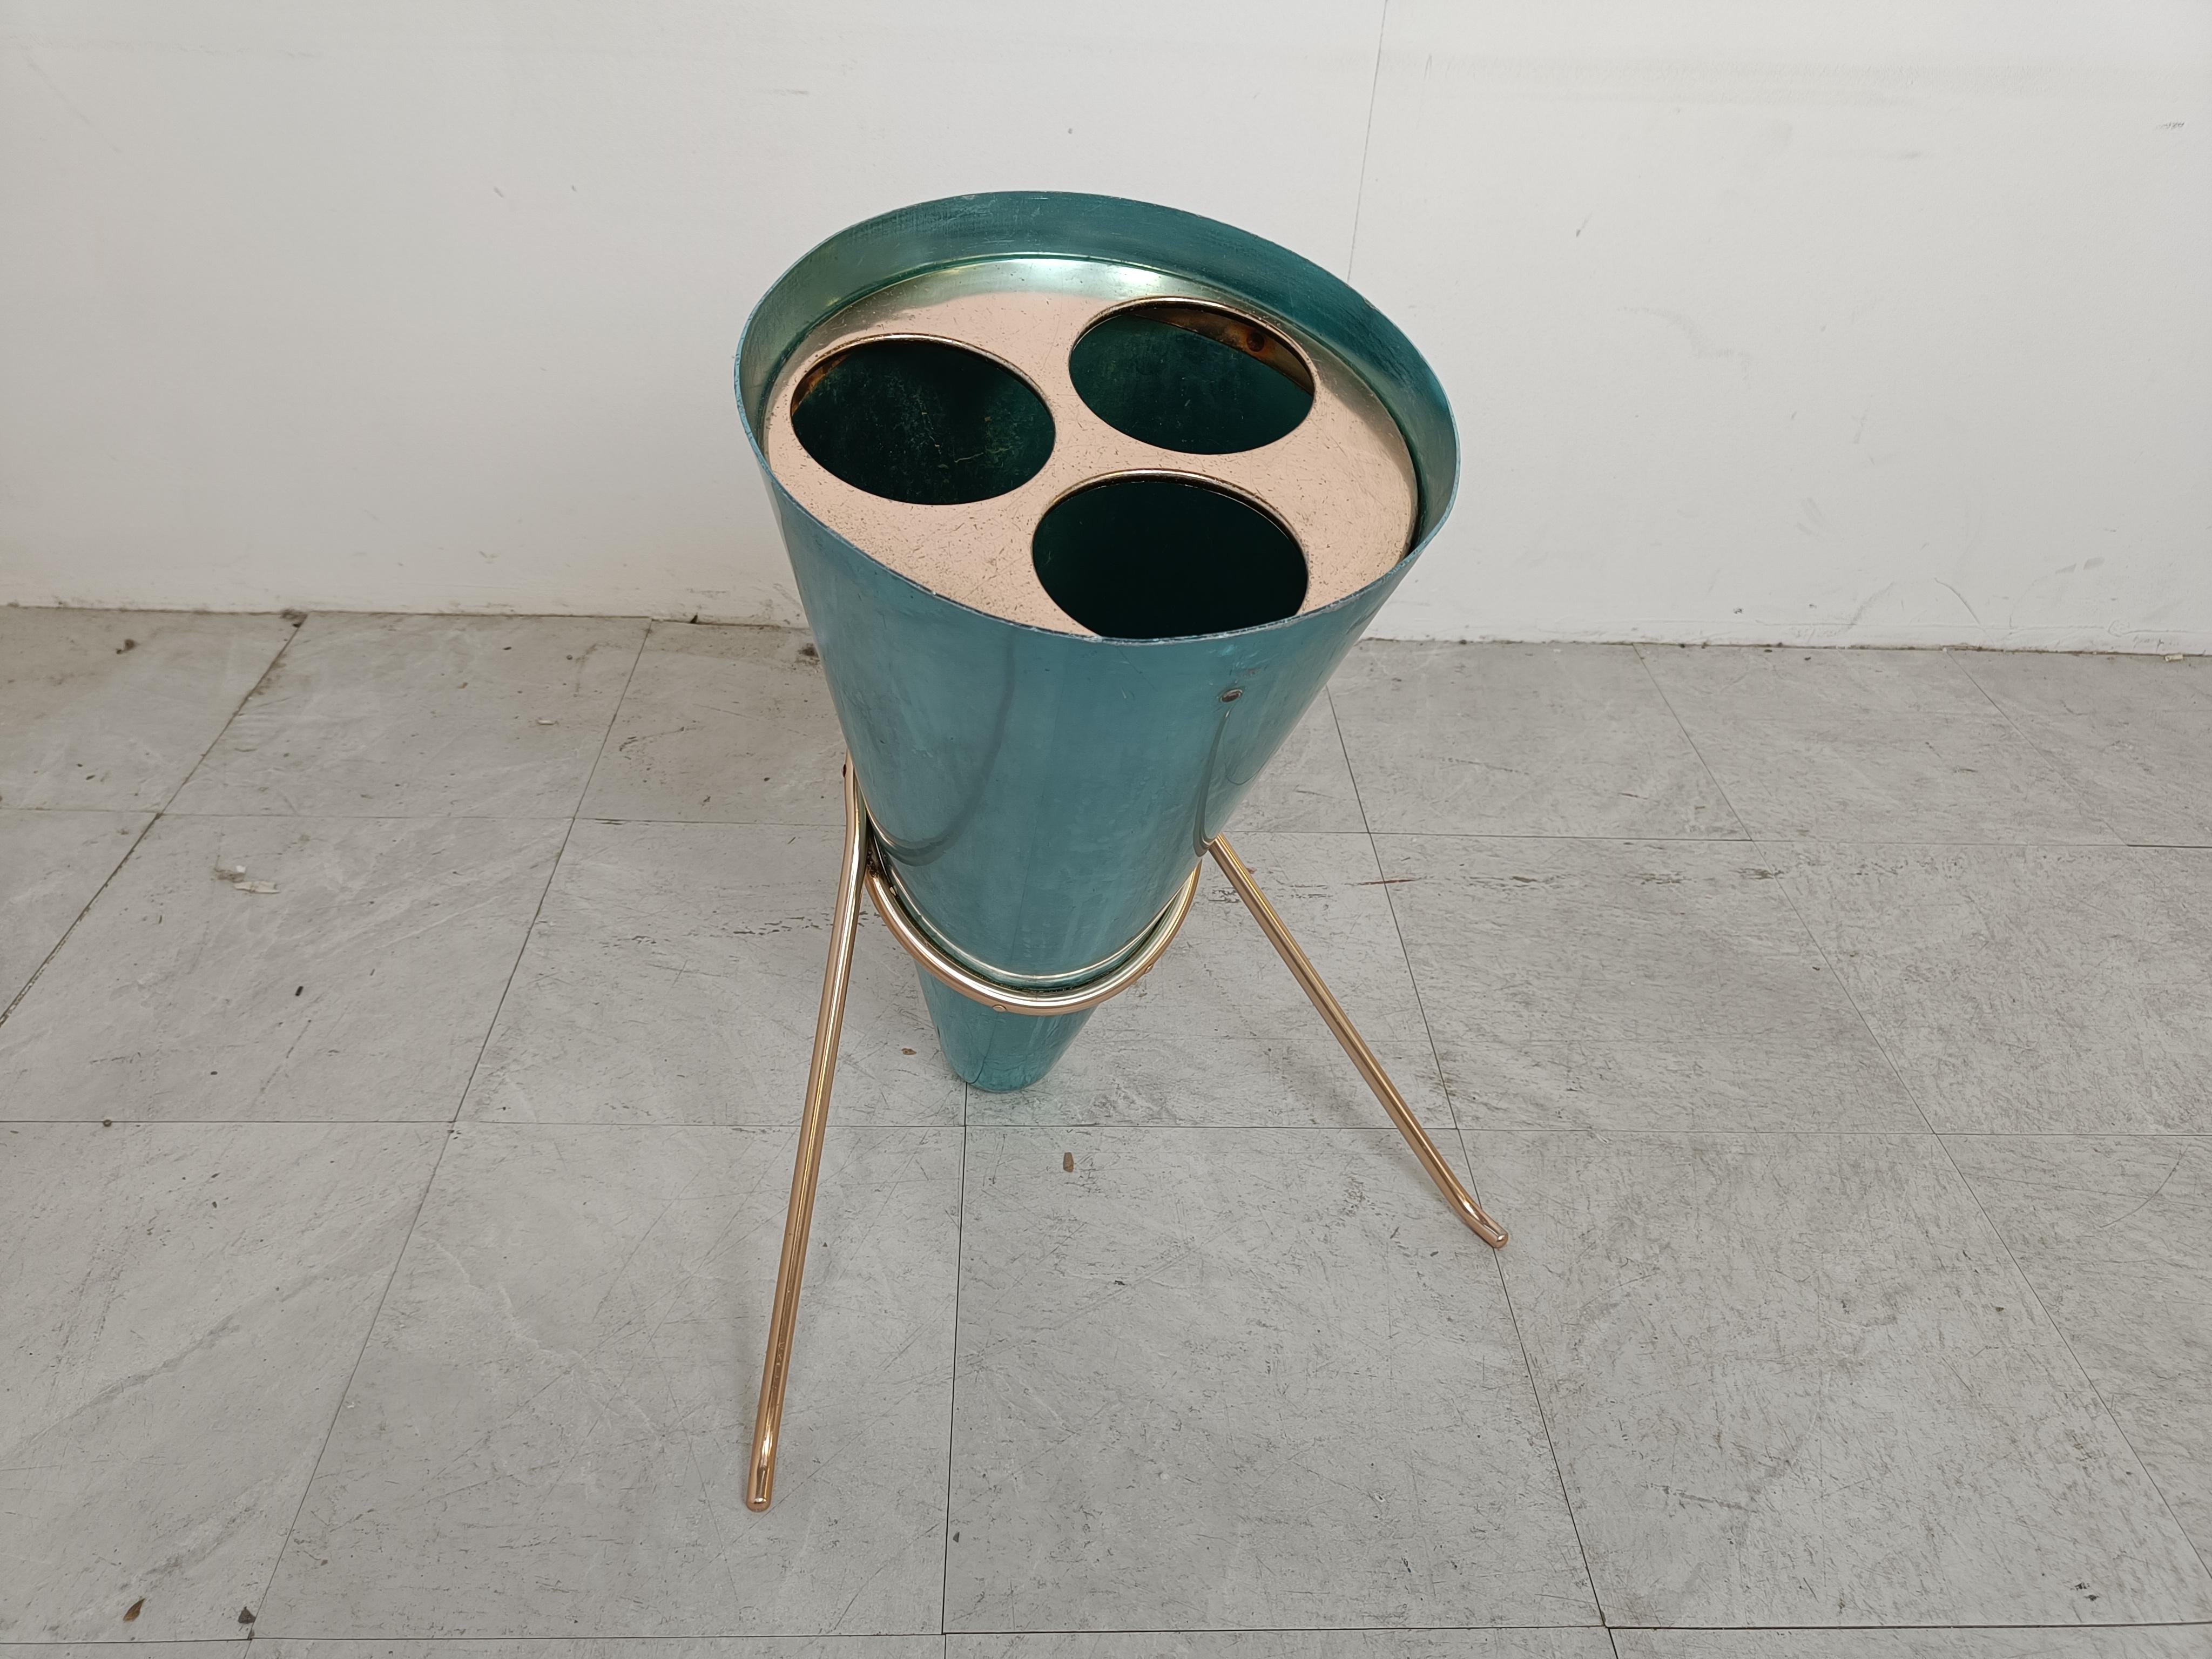 Very rare mid century umbrella holder designed by Ettore Sottsass for Rinnovel Italy.

The timeless design is very attractive.

Good condition for its age with normal wear and tear.

Very decorative and collectible item.

1950s -